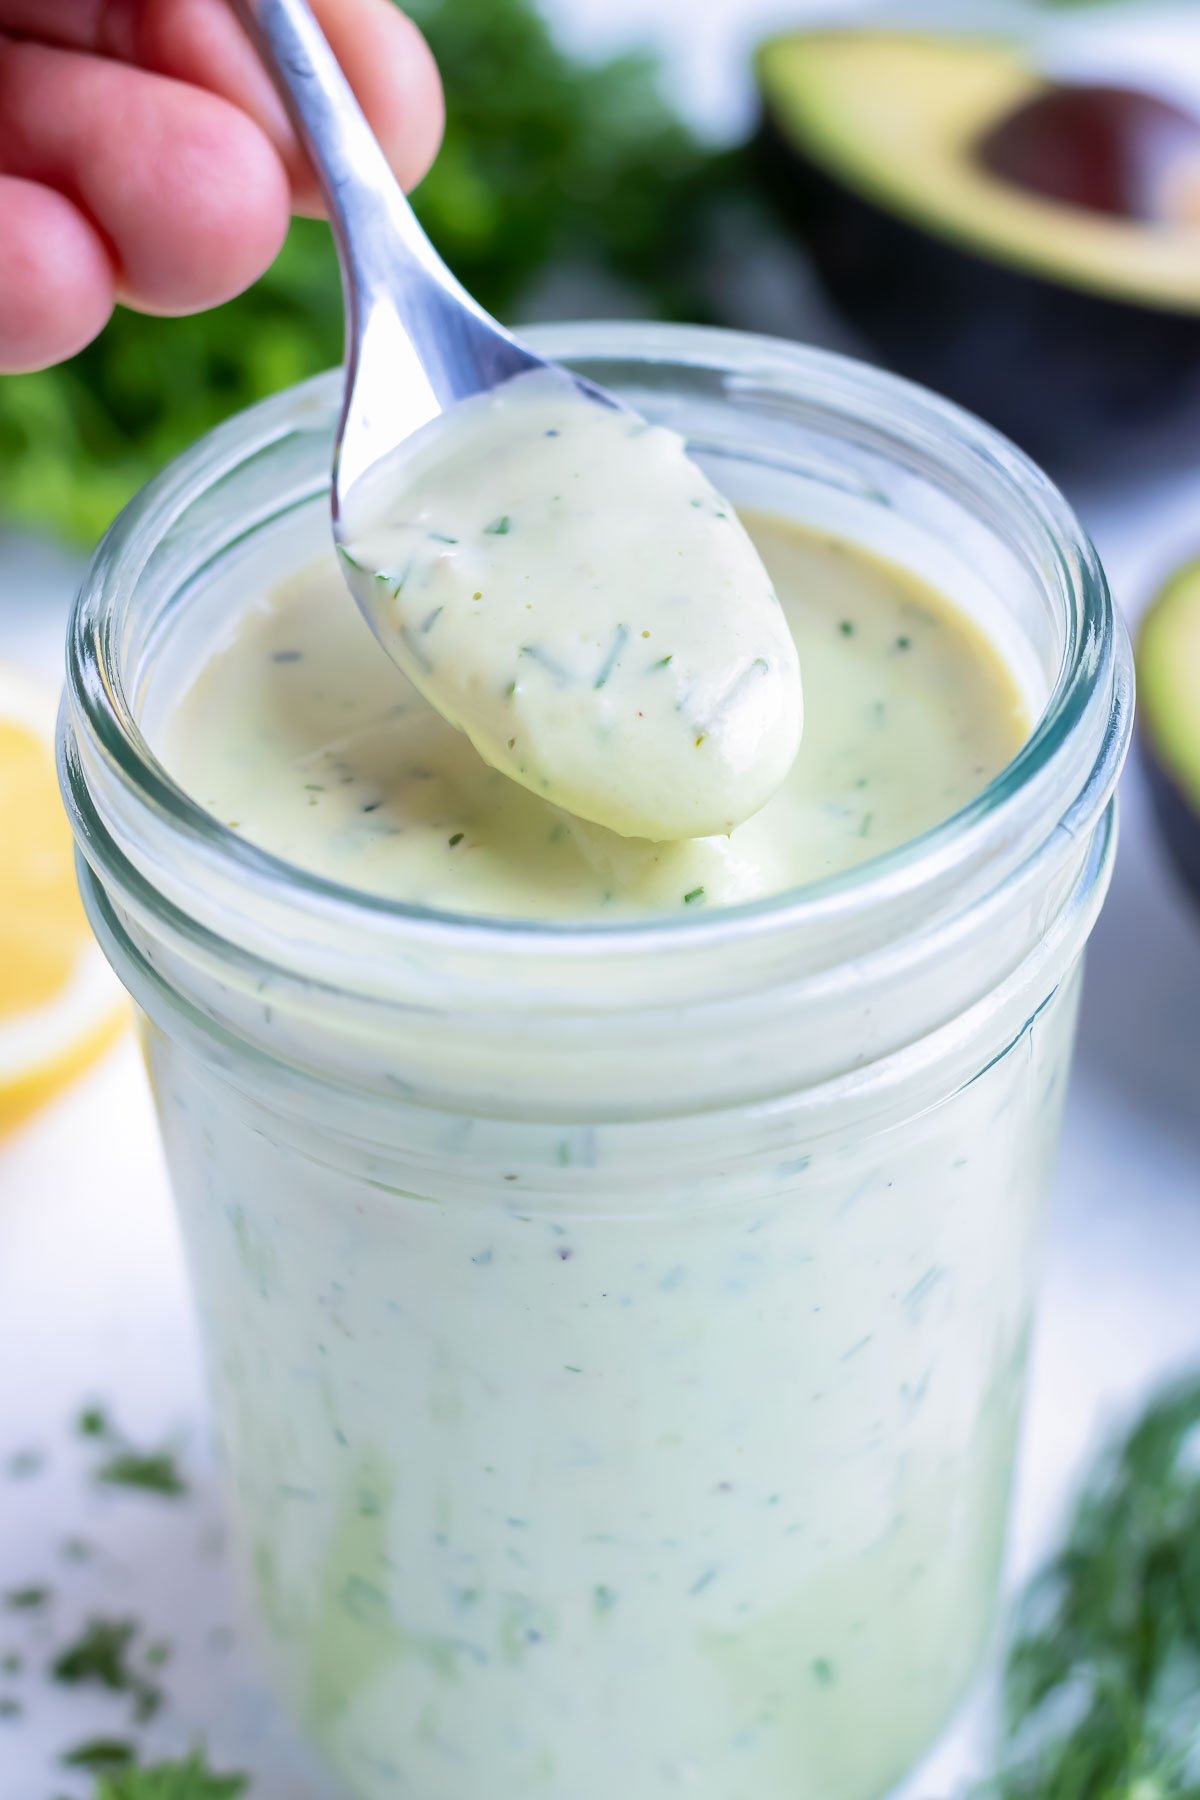 A spoon is shown lifting the avocado ranch dressing from the jar.